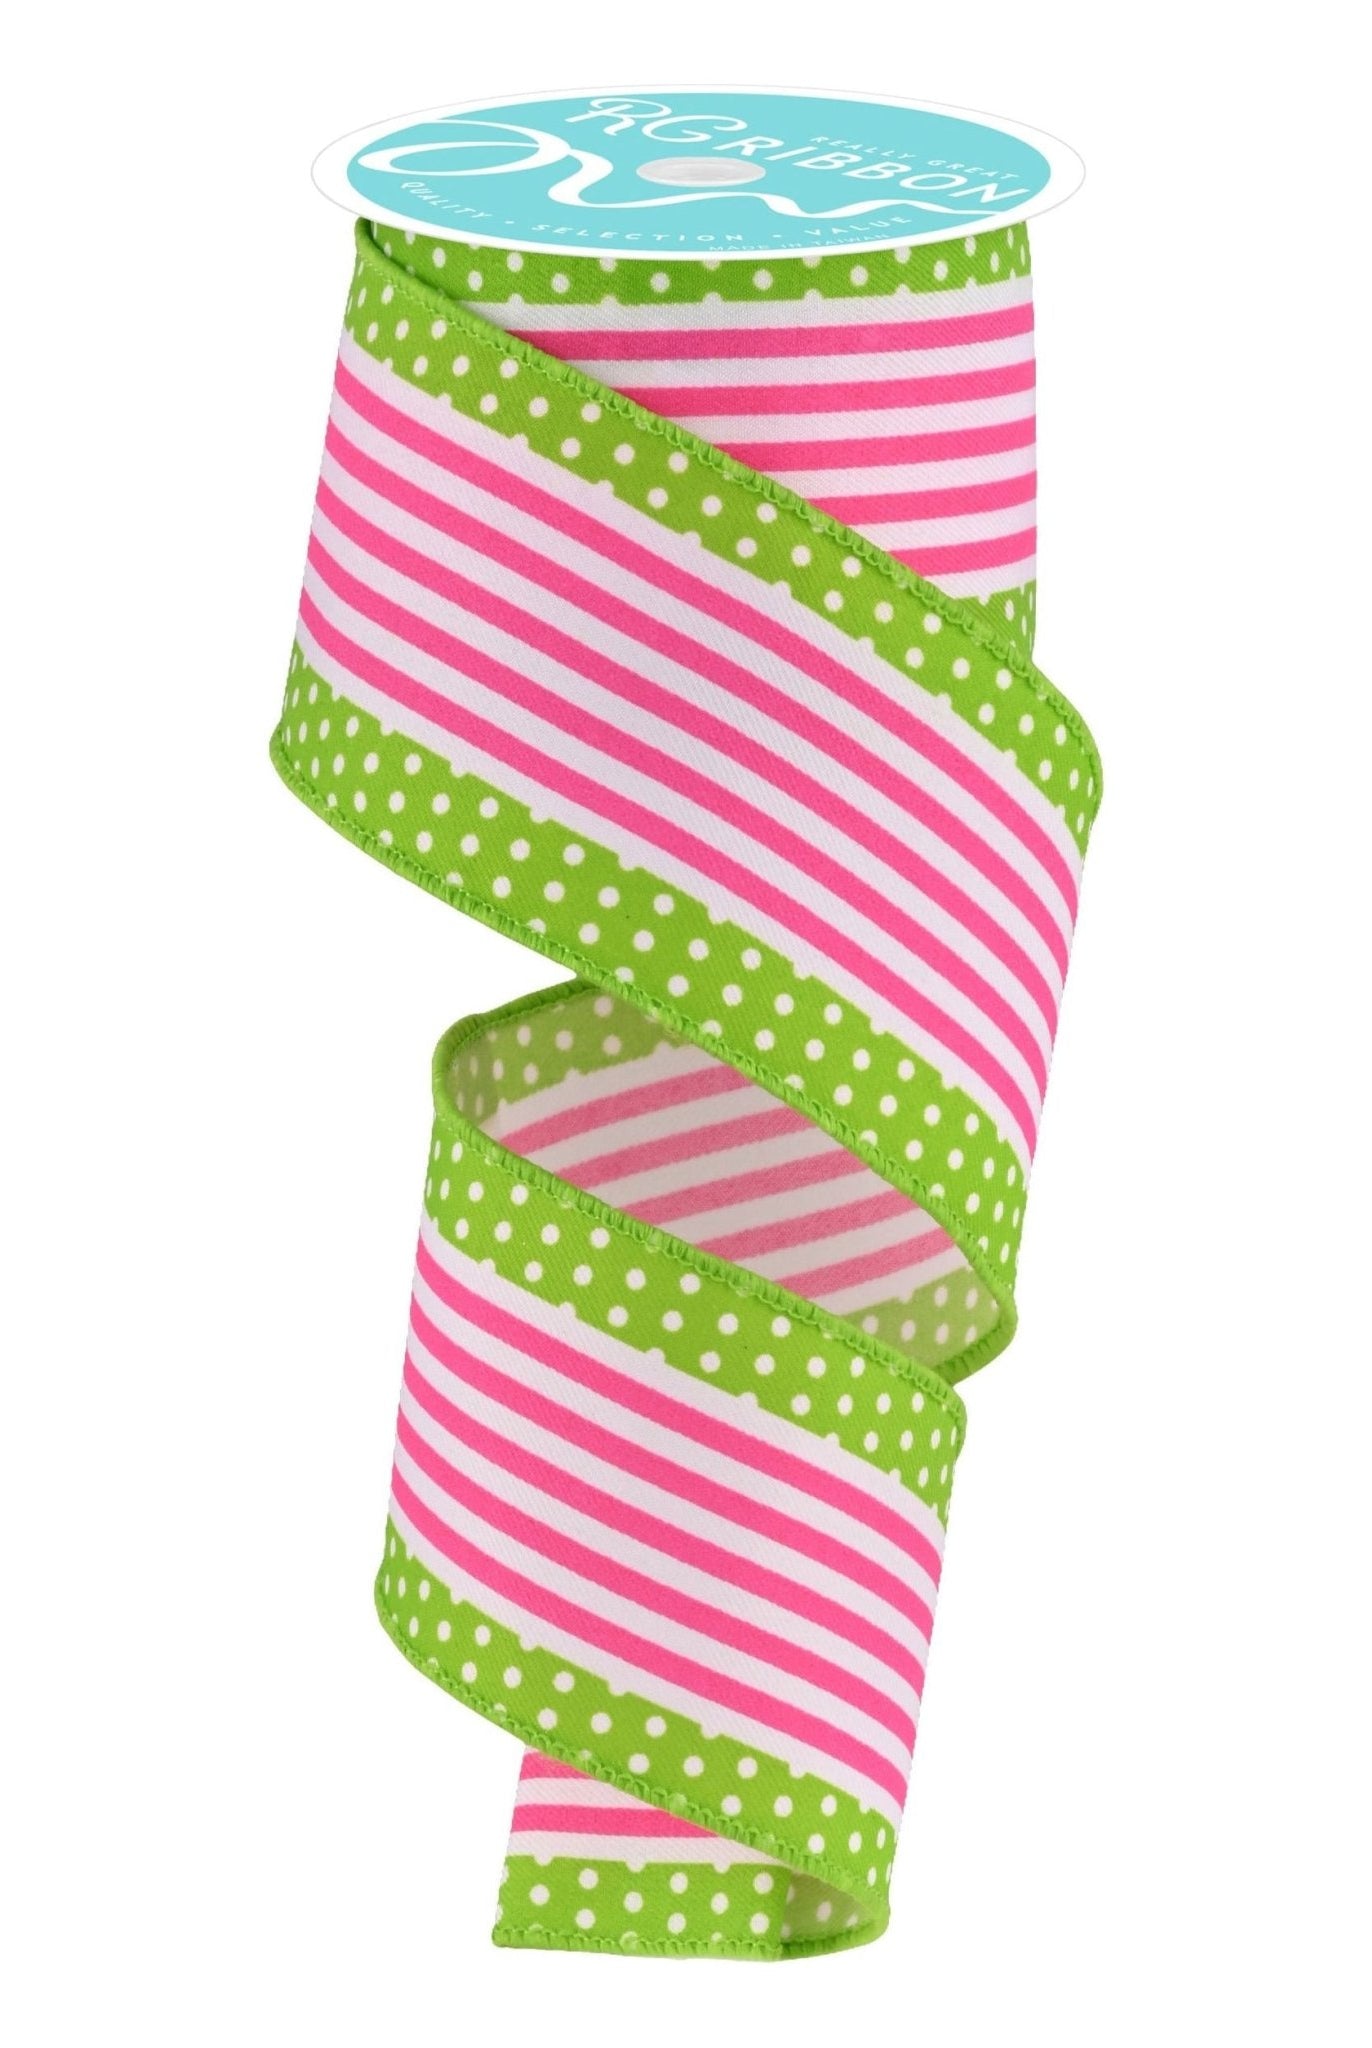 2.5" Vertical Stripe Polka Dot Edge Ribbon: Hot Pink/Lime (10 Yards) - Michelle's aDOORable Creations - Wired Edge Ribbon